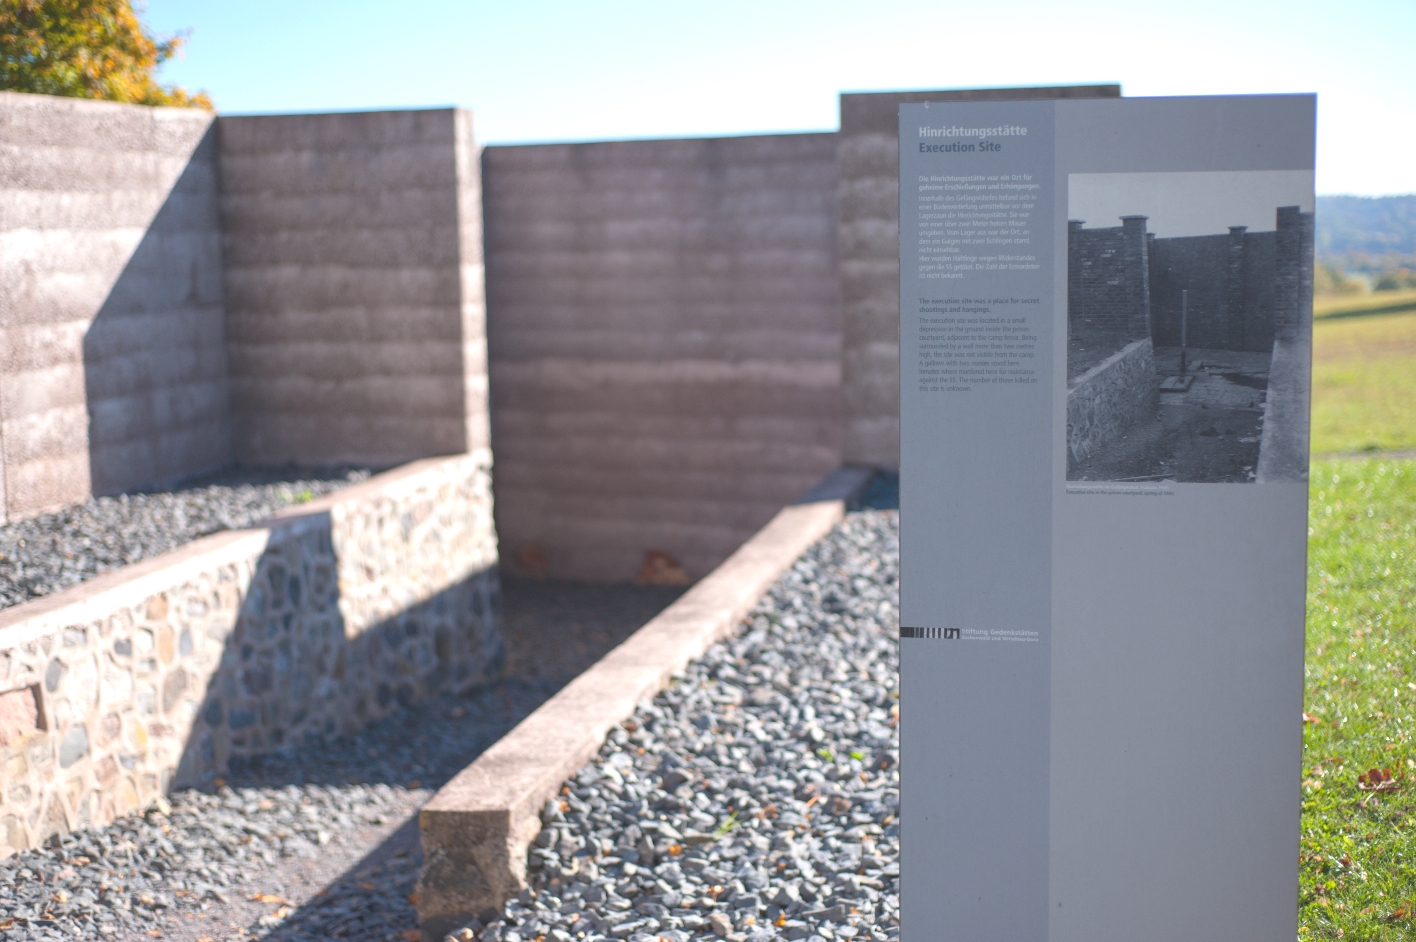 In the foreground on the right is the information board at the execution site, which offers a historical comparison of the current design of the execution site. In the background is a depression with high concrete walls that replicates the former execution site.